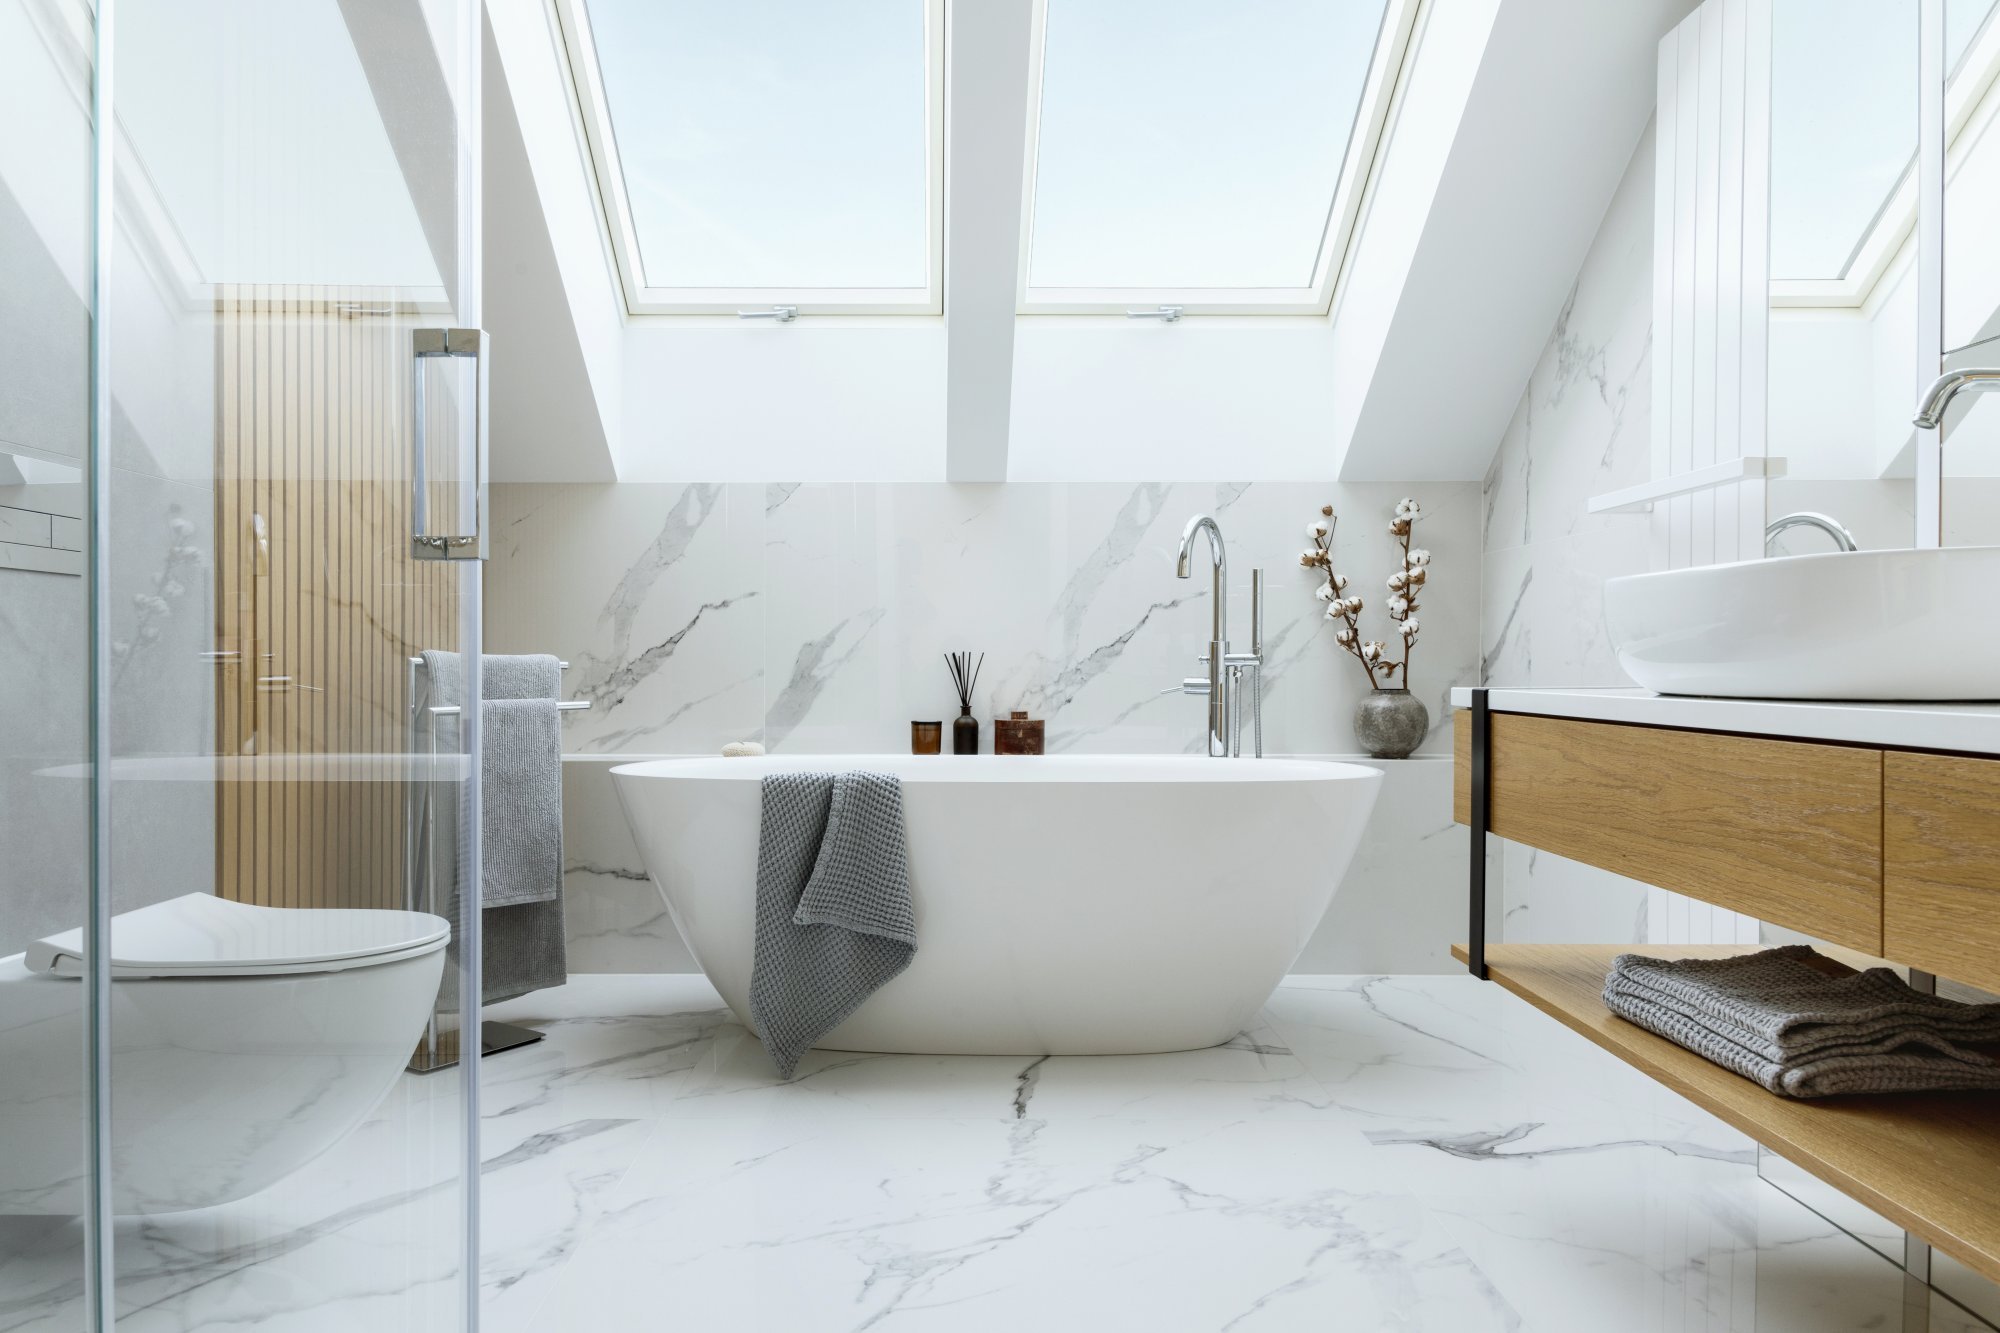 stylish-bathroom-interior-design-with-marble-panels-bathtub-towels-other-personal-bathroom-accessories-modern-glamour-interior-concept-roof-window-template.jpg